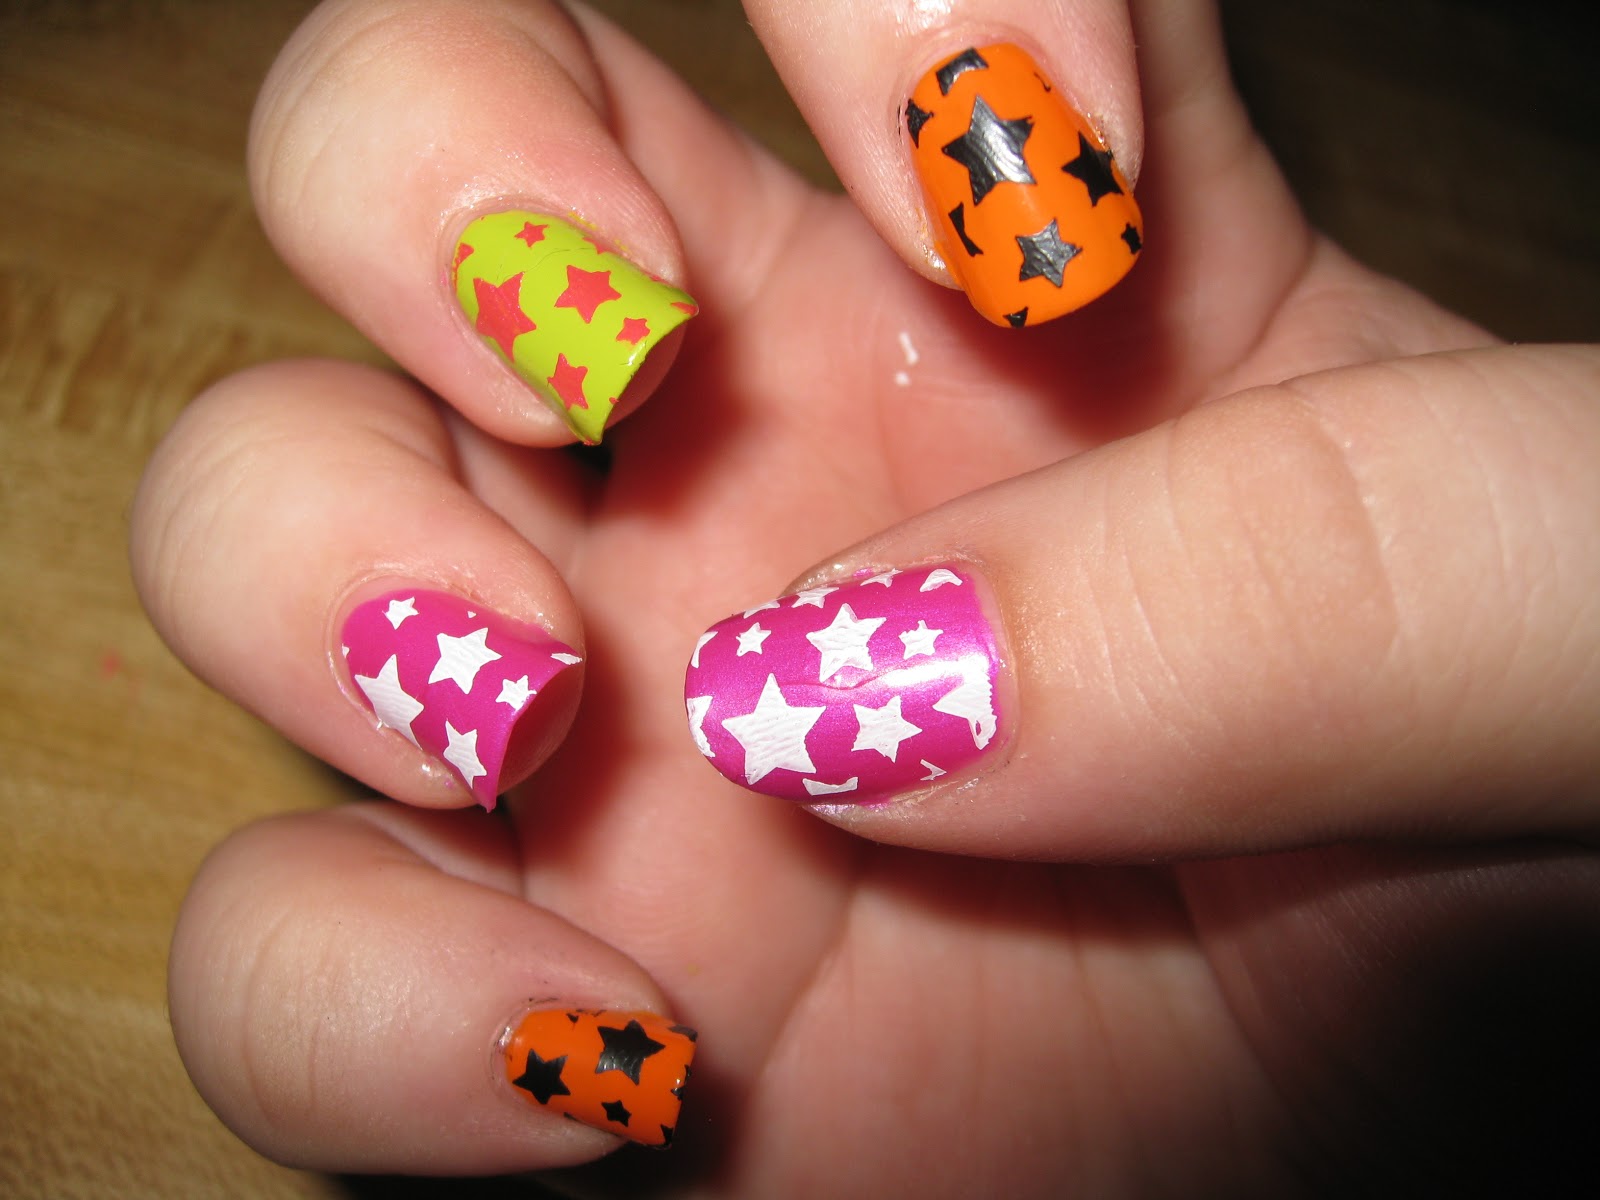 5. "Circus of Horrors: Scary Clown Nail Designs" - wide 7